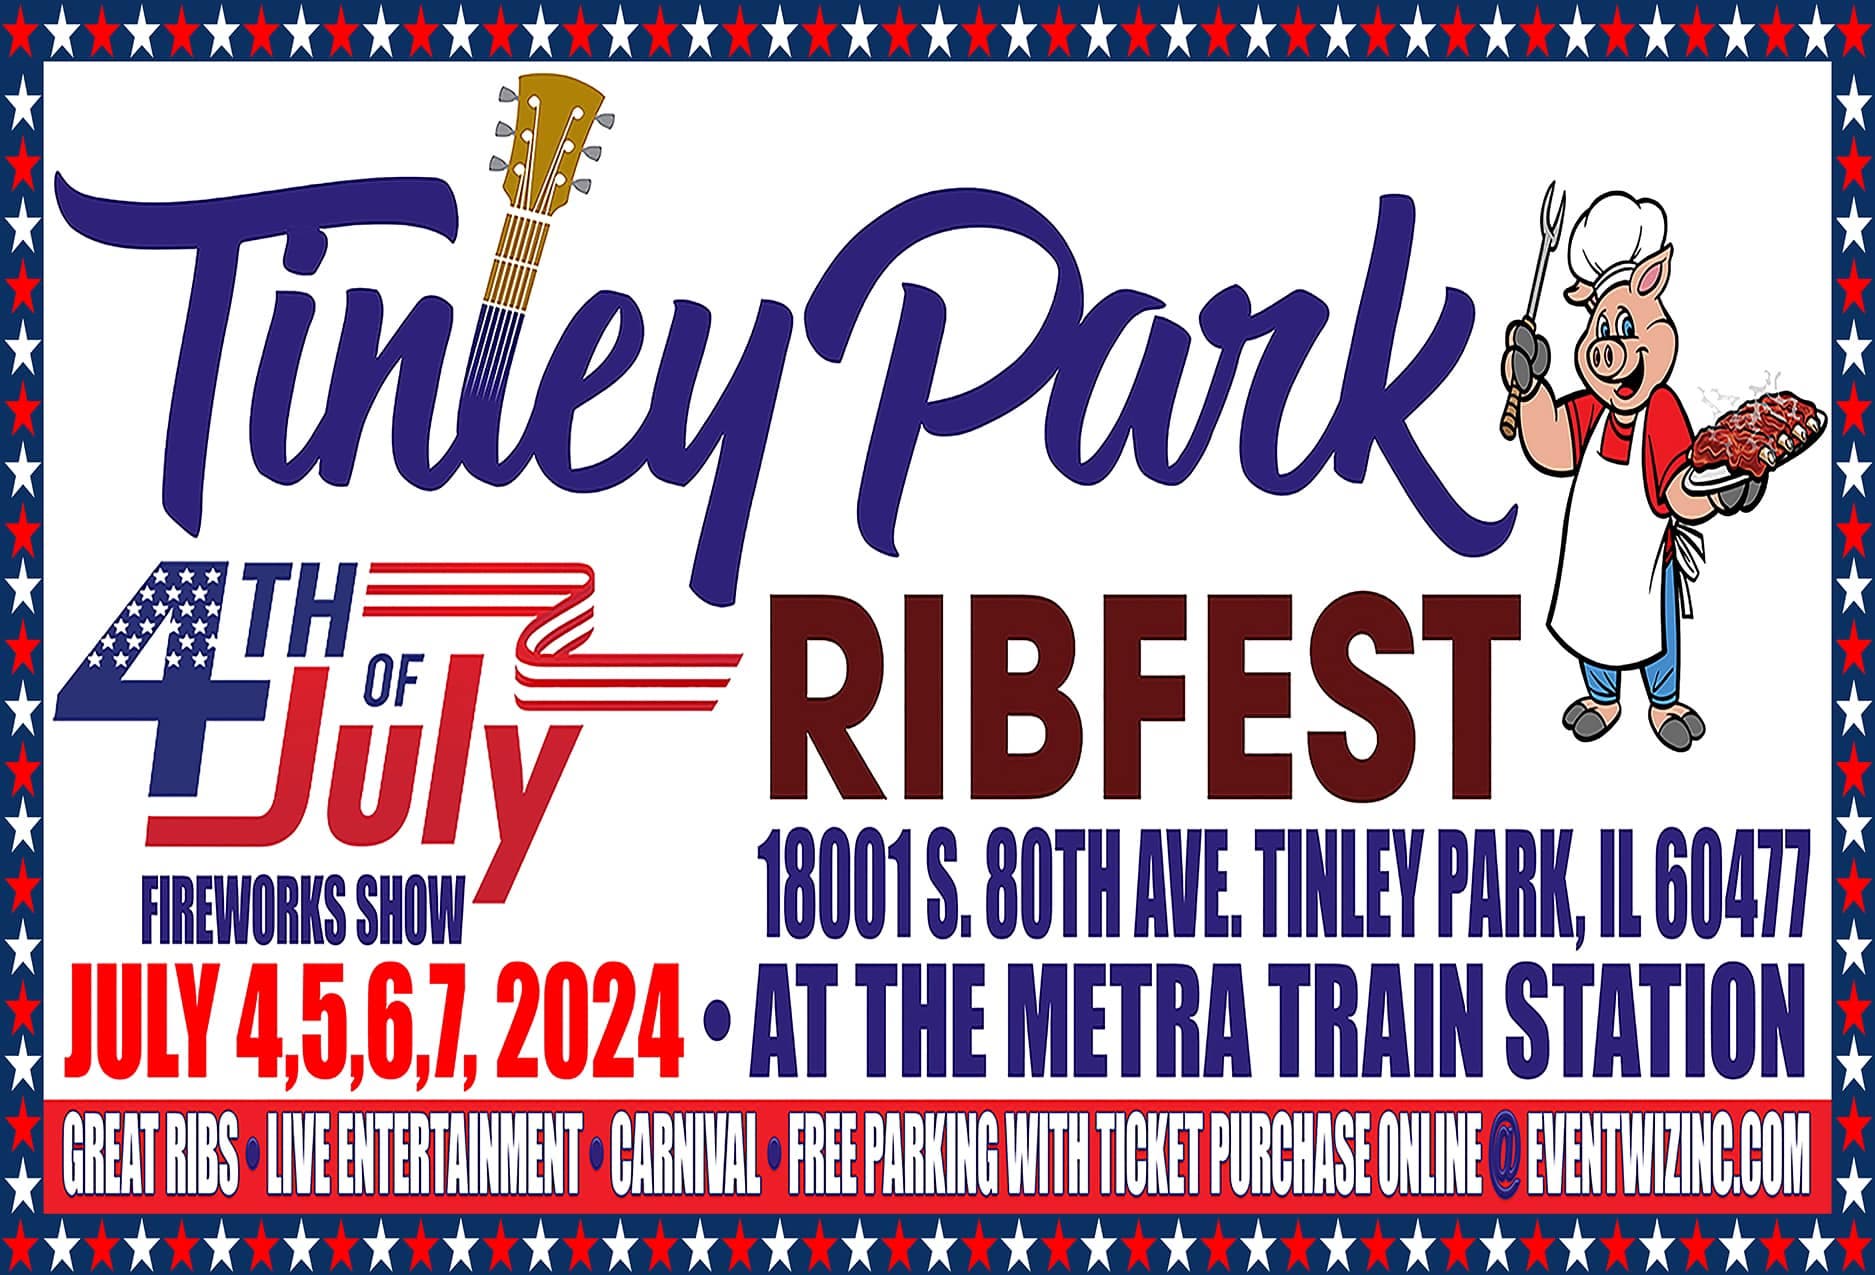 Tinley Park Ribfest July 4, 5, 6, and 7th 2024!